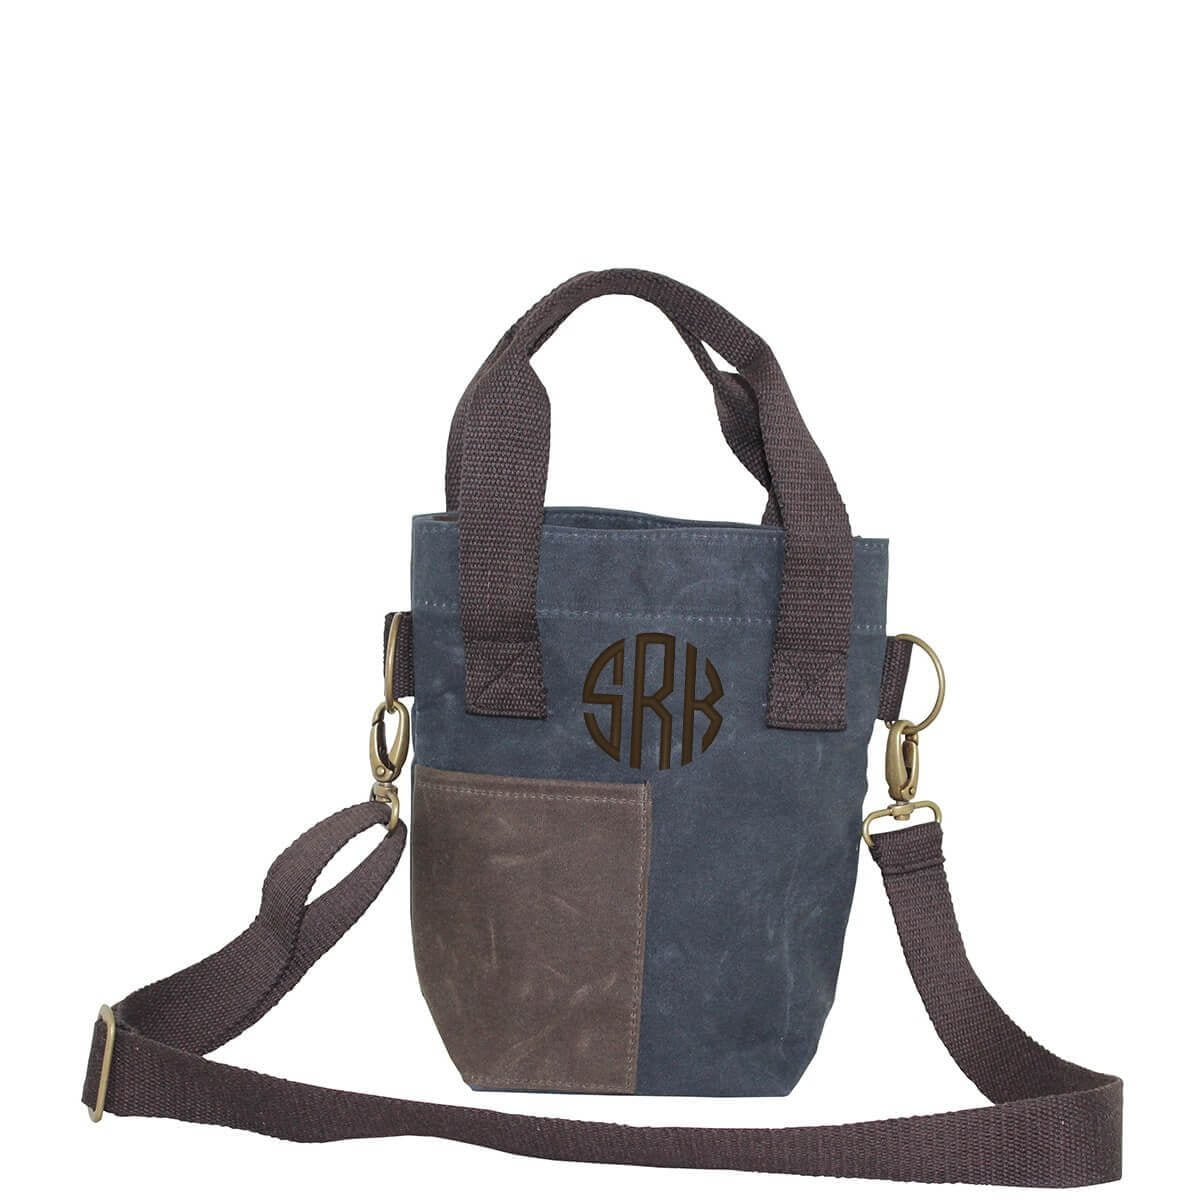 Monogrammed Wine Tote Bag - Leather Wine Carrier Personalized